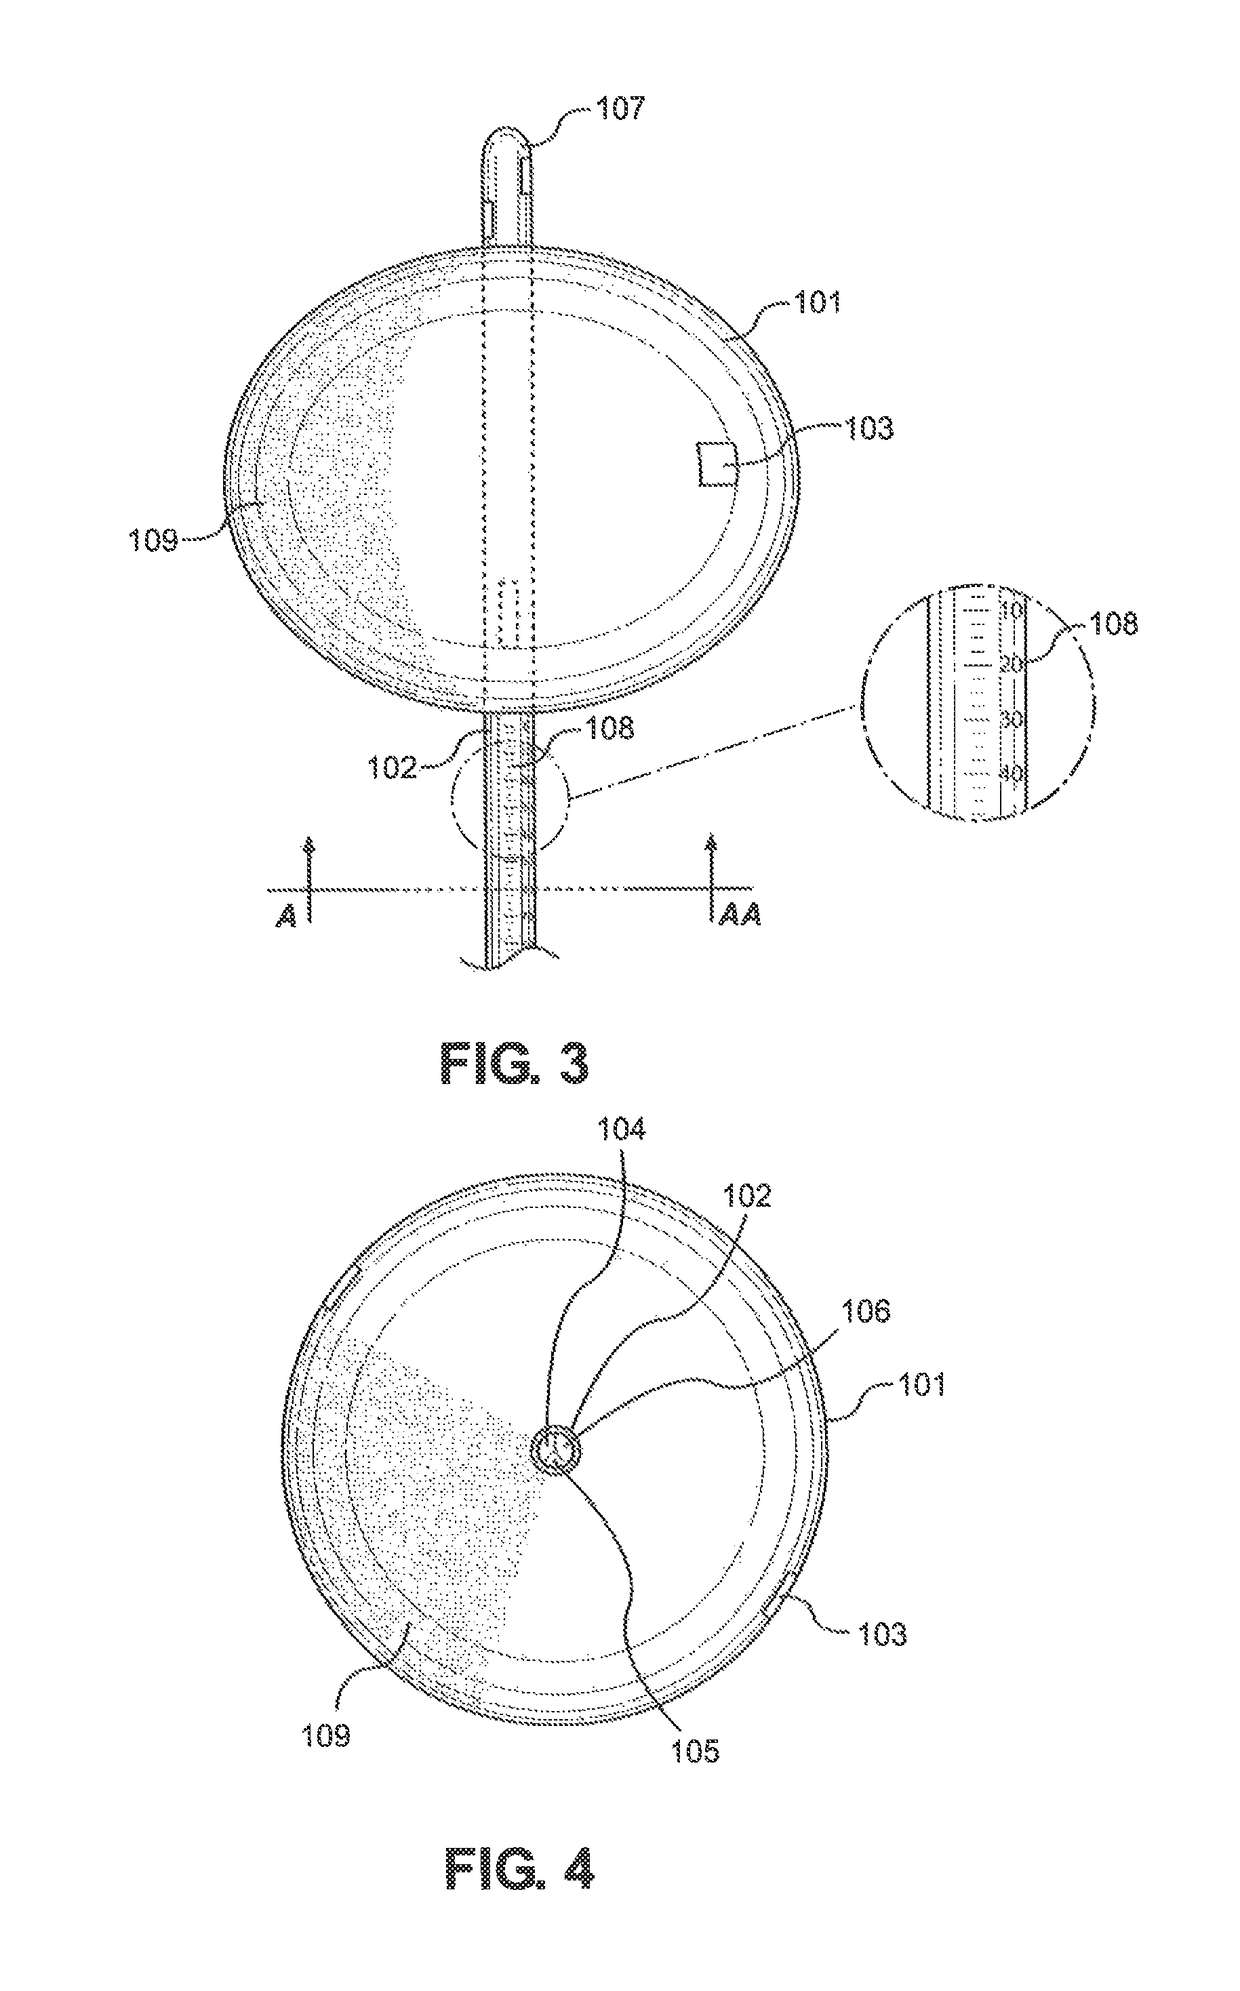 Balloon immobilization device for radiation treatment